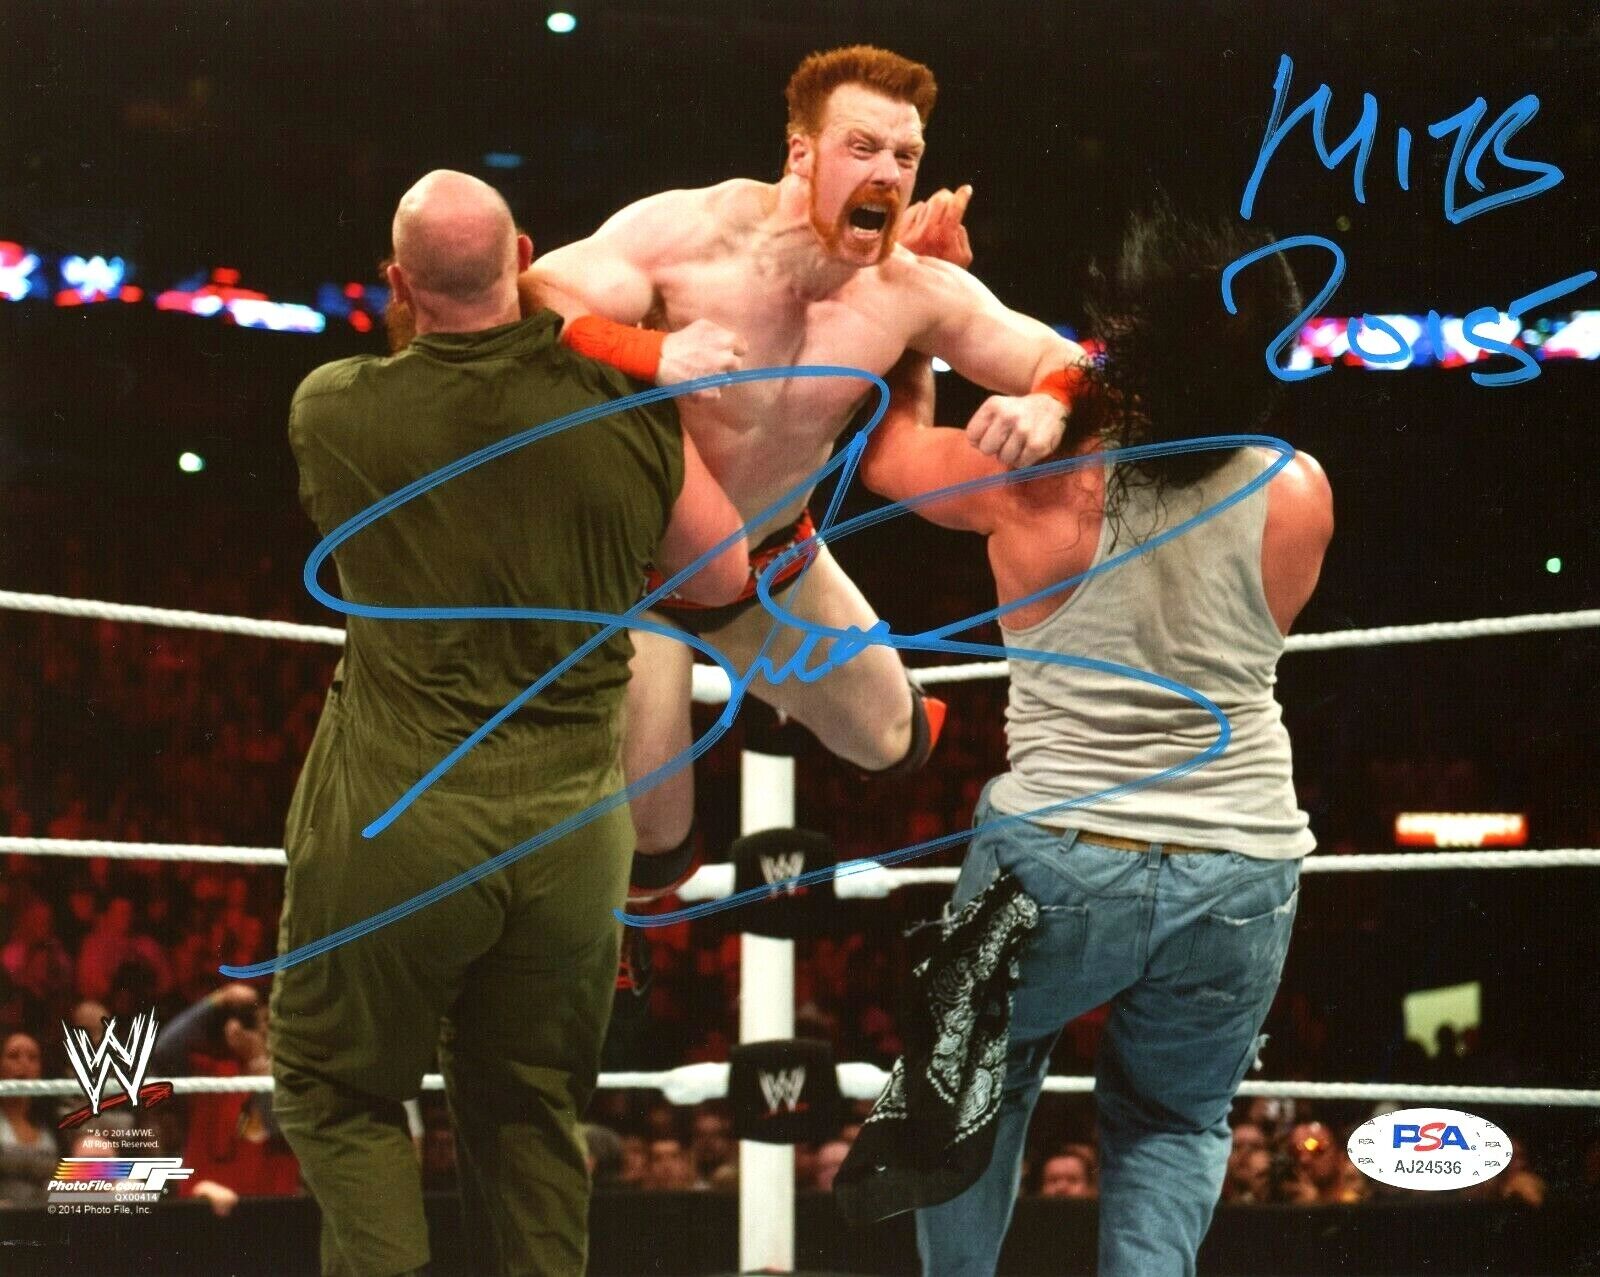 WWE SHEAMUS HAND SIGNED AUTOGRAPHED 8X10 Photo Poster painting WITH PROOF AND PSA DNA COA 15